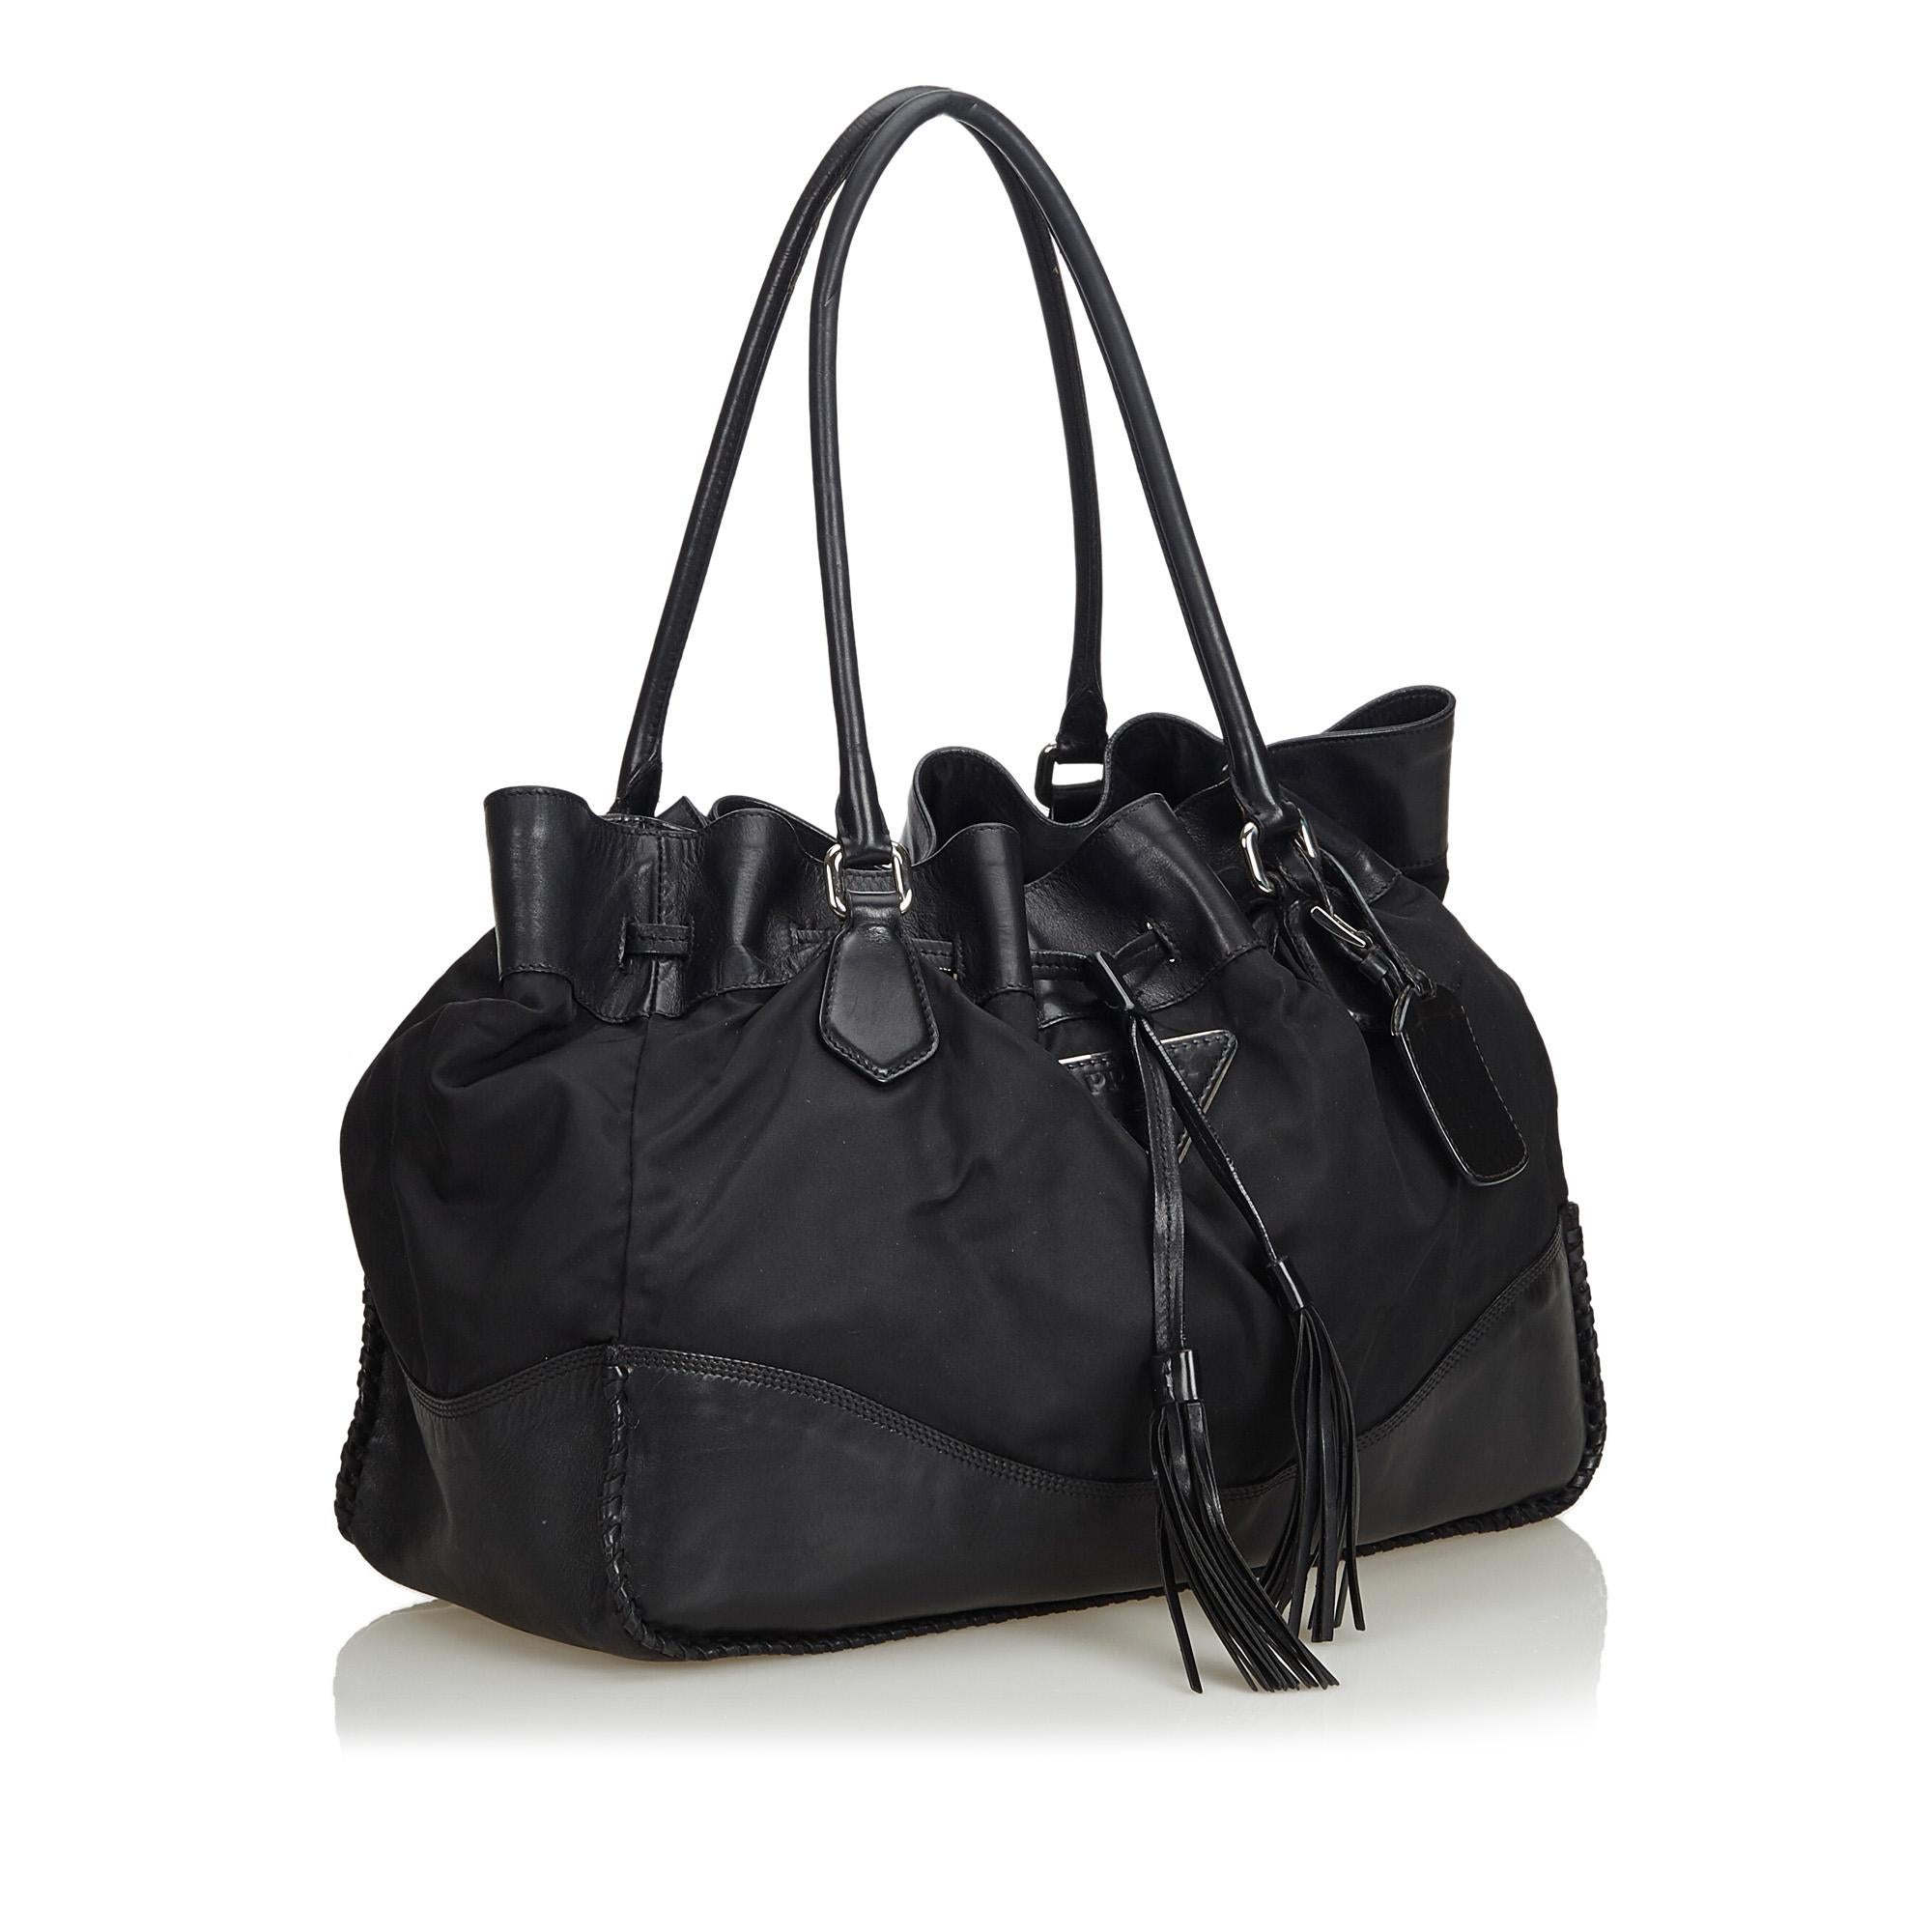 This tote bag features a nylon and leather body, rolled leather handles, a top drawstring closure with tassel detail, and interior zip and slip pockets. It carries as B condition rating.

Inclusions: 
This item does not come with